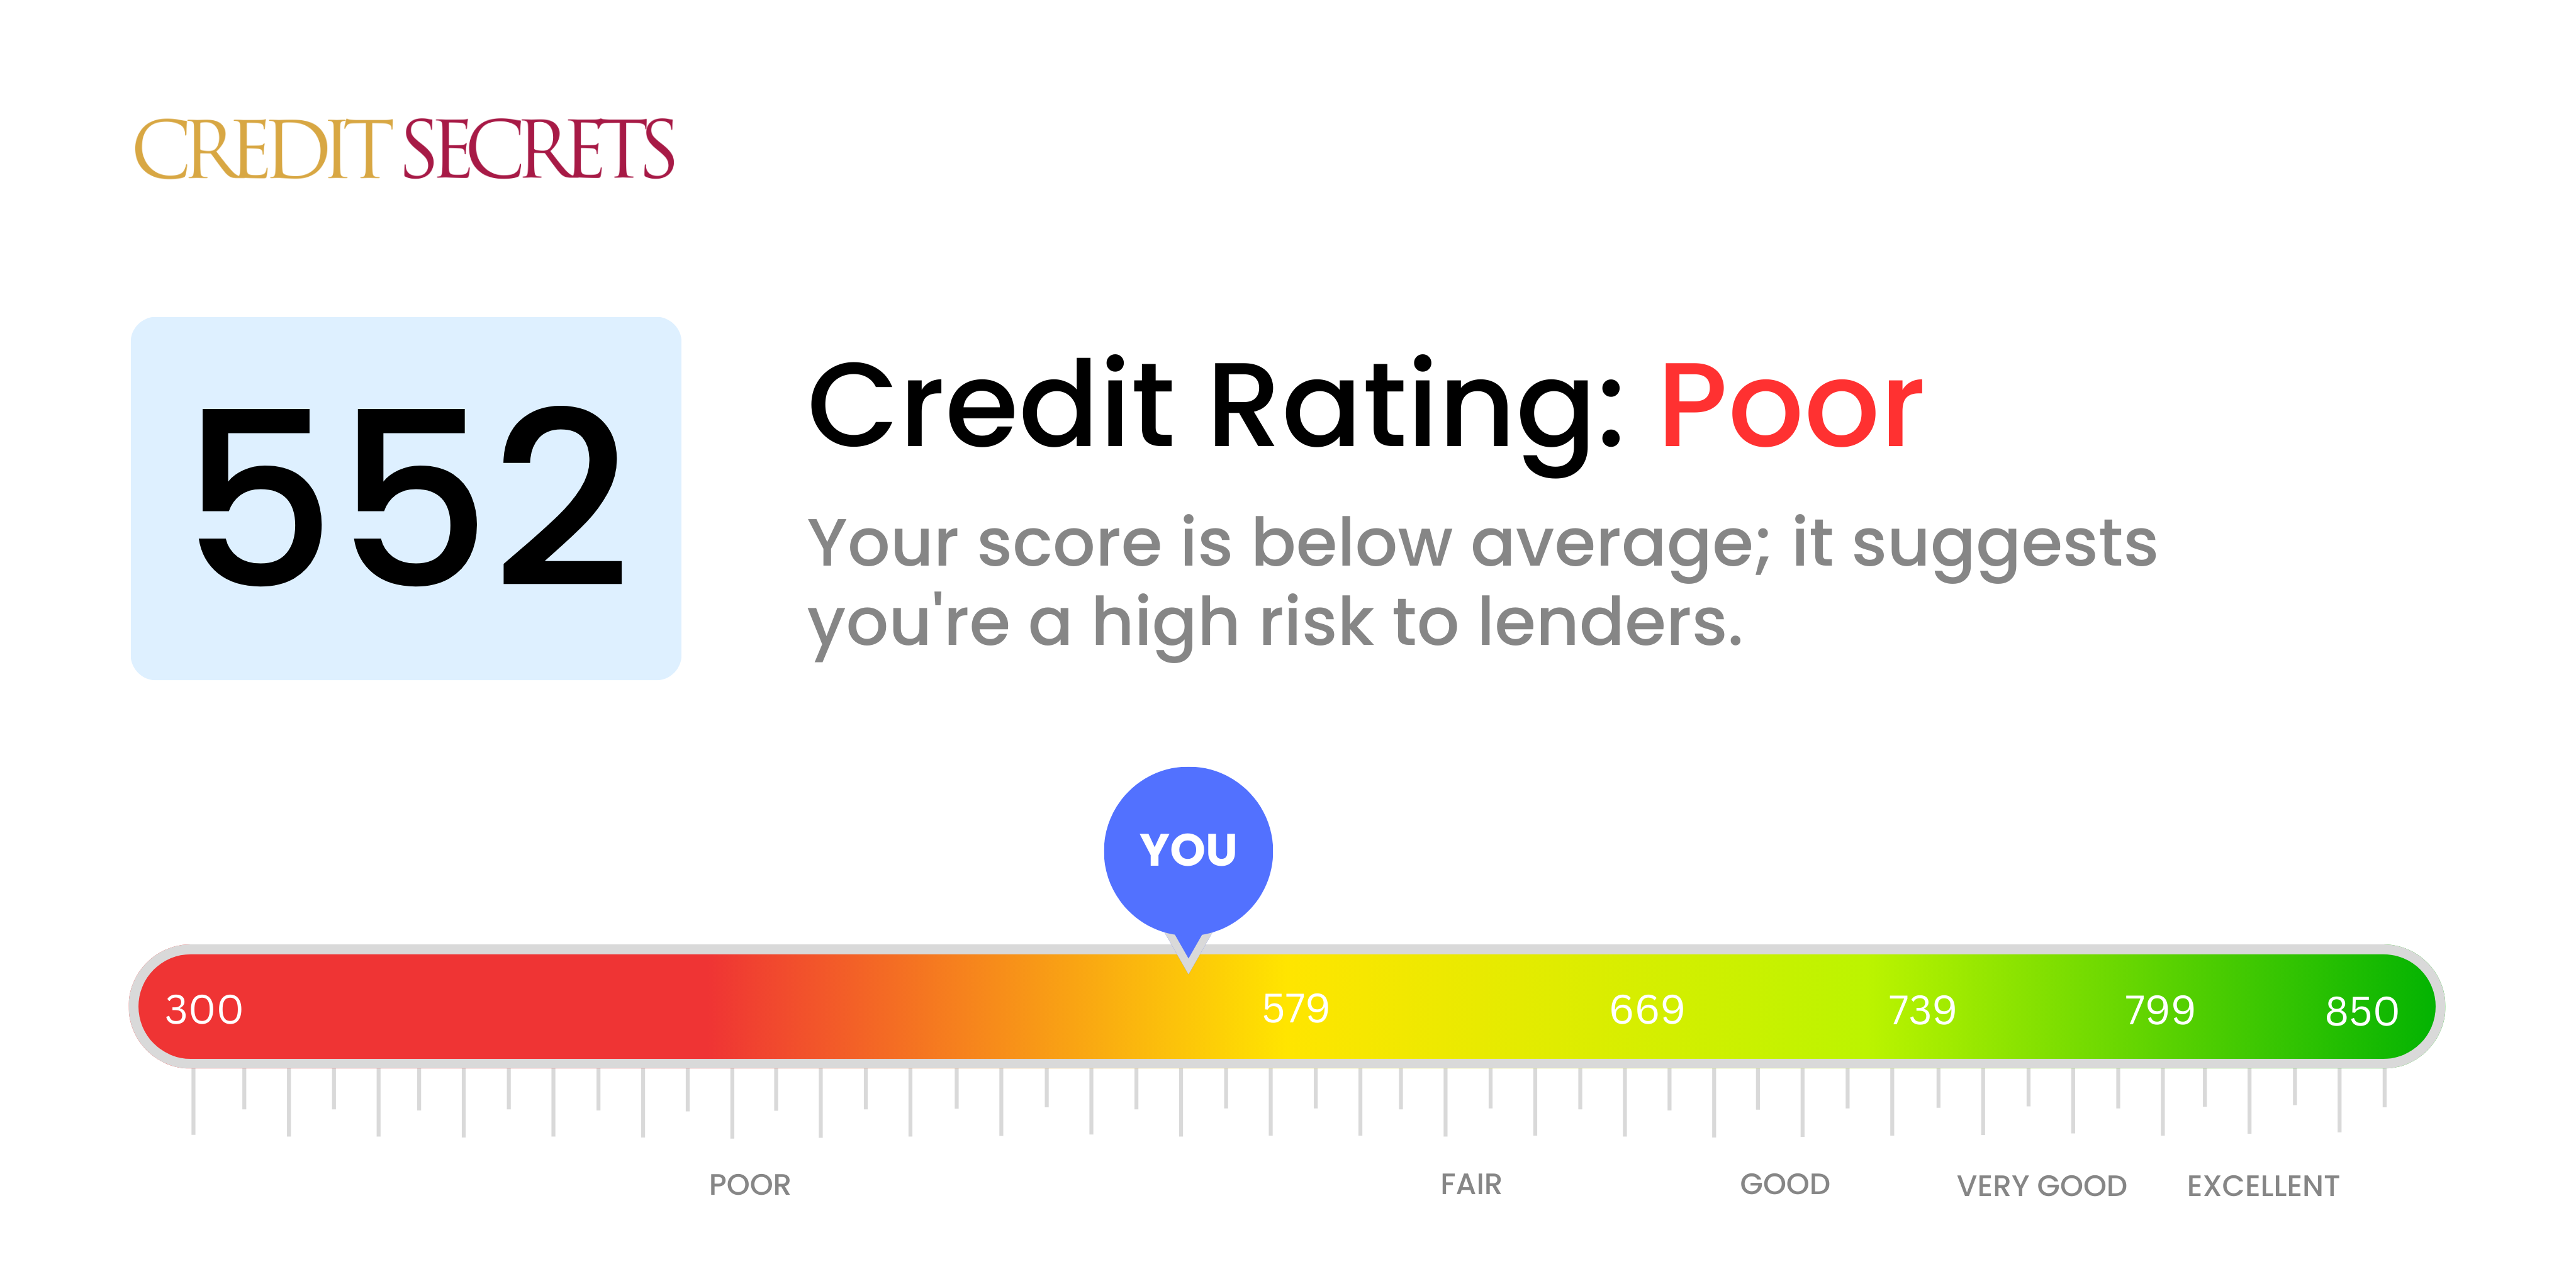 Is 552 a good credit score?